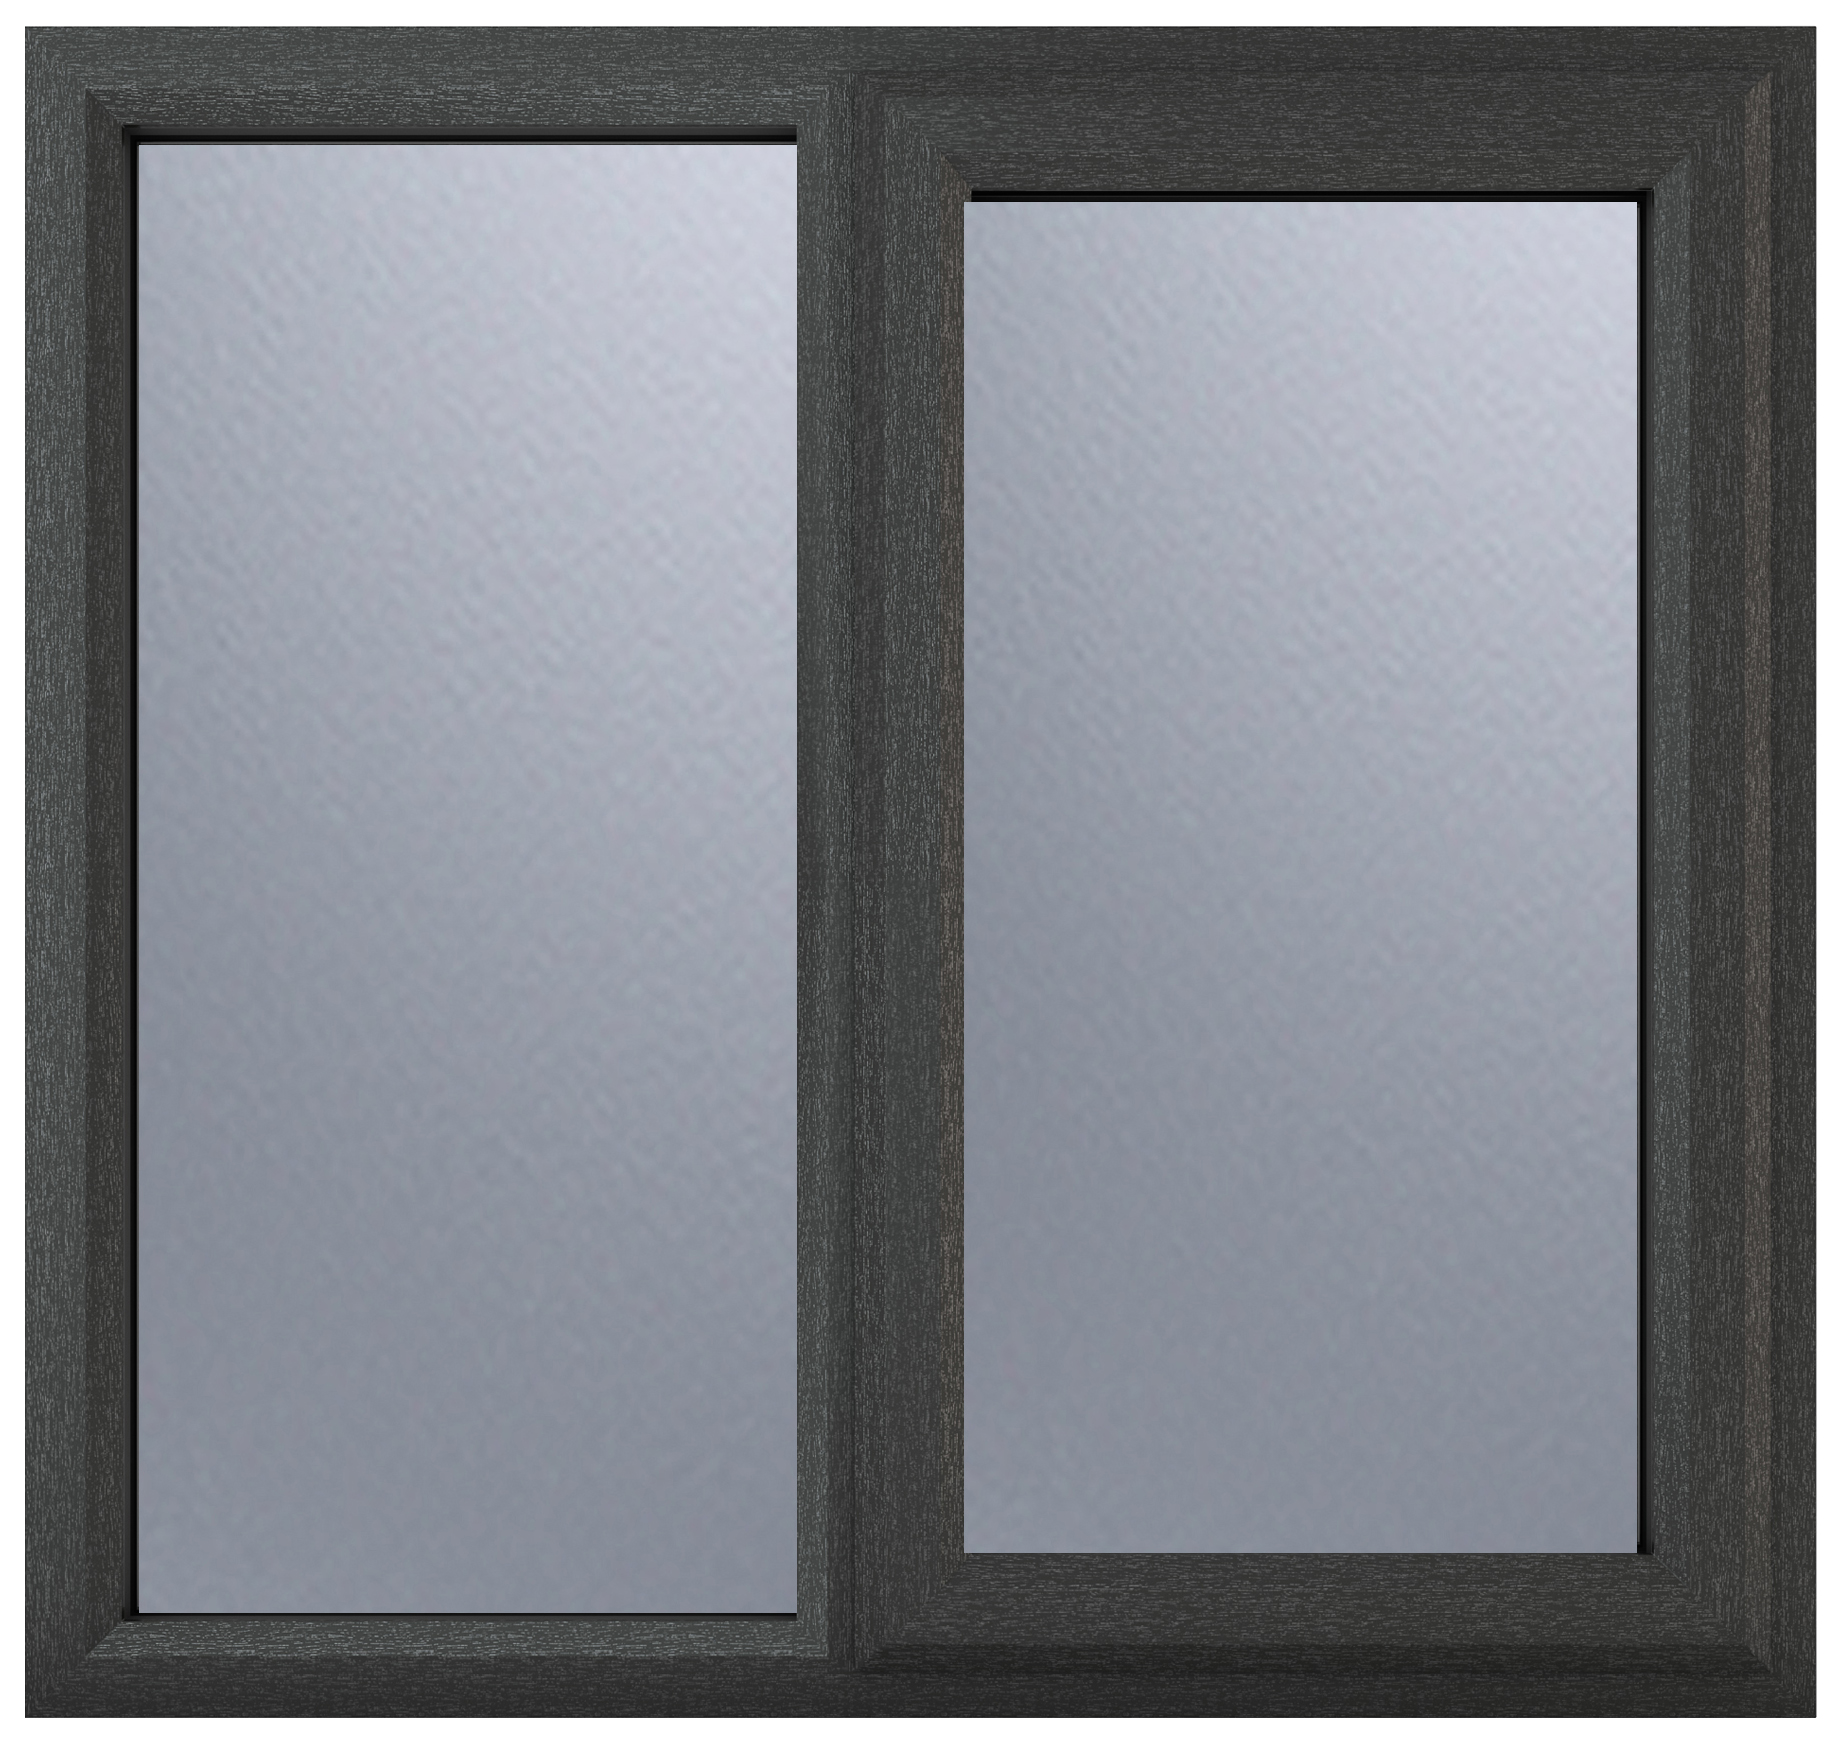 Crystal uPVC Grey Right Hung Obscure Double Glazed Fixed Light Window - 1190 x 965mm